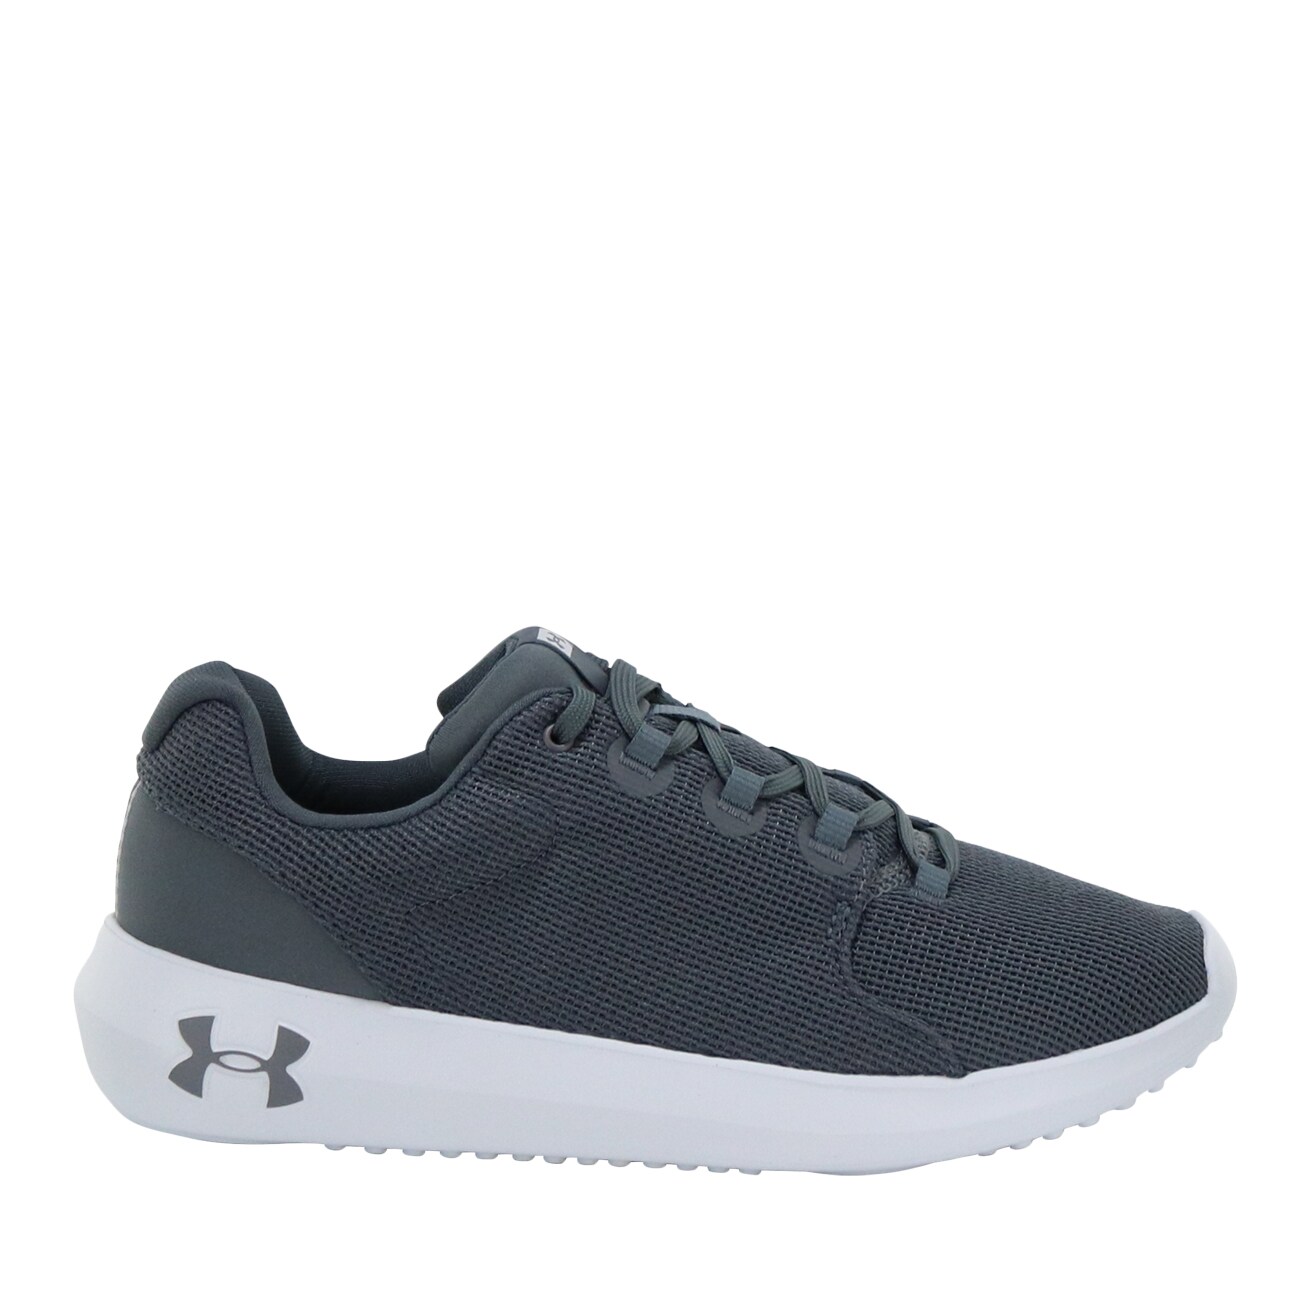 UNDER ARMOUR Men's Ripple 2.0 Sneaker | The Shoe Company